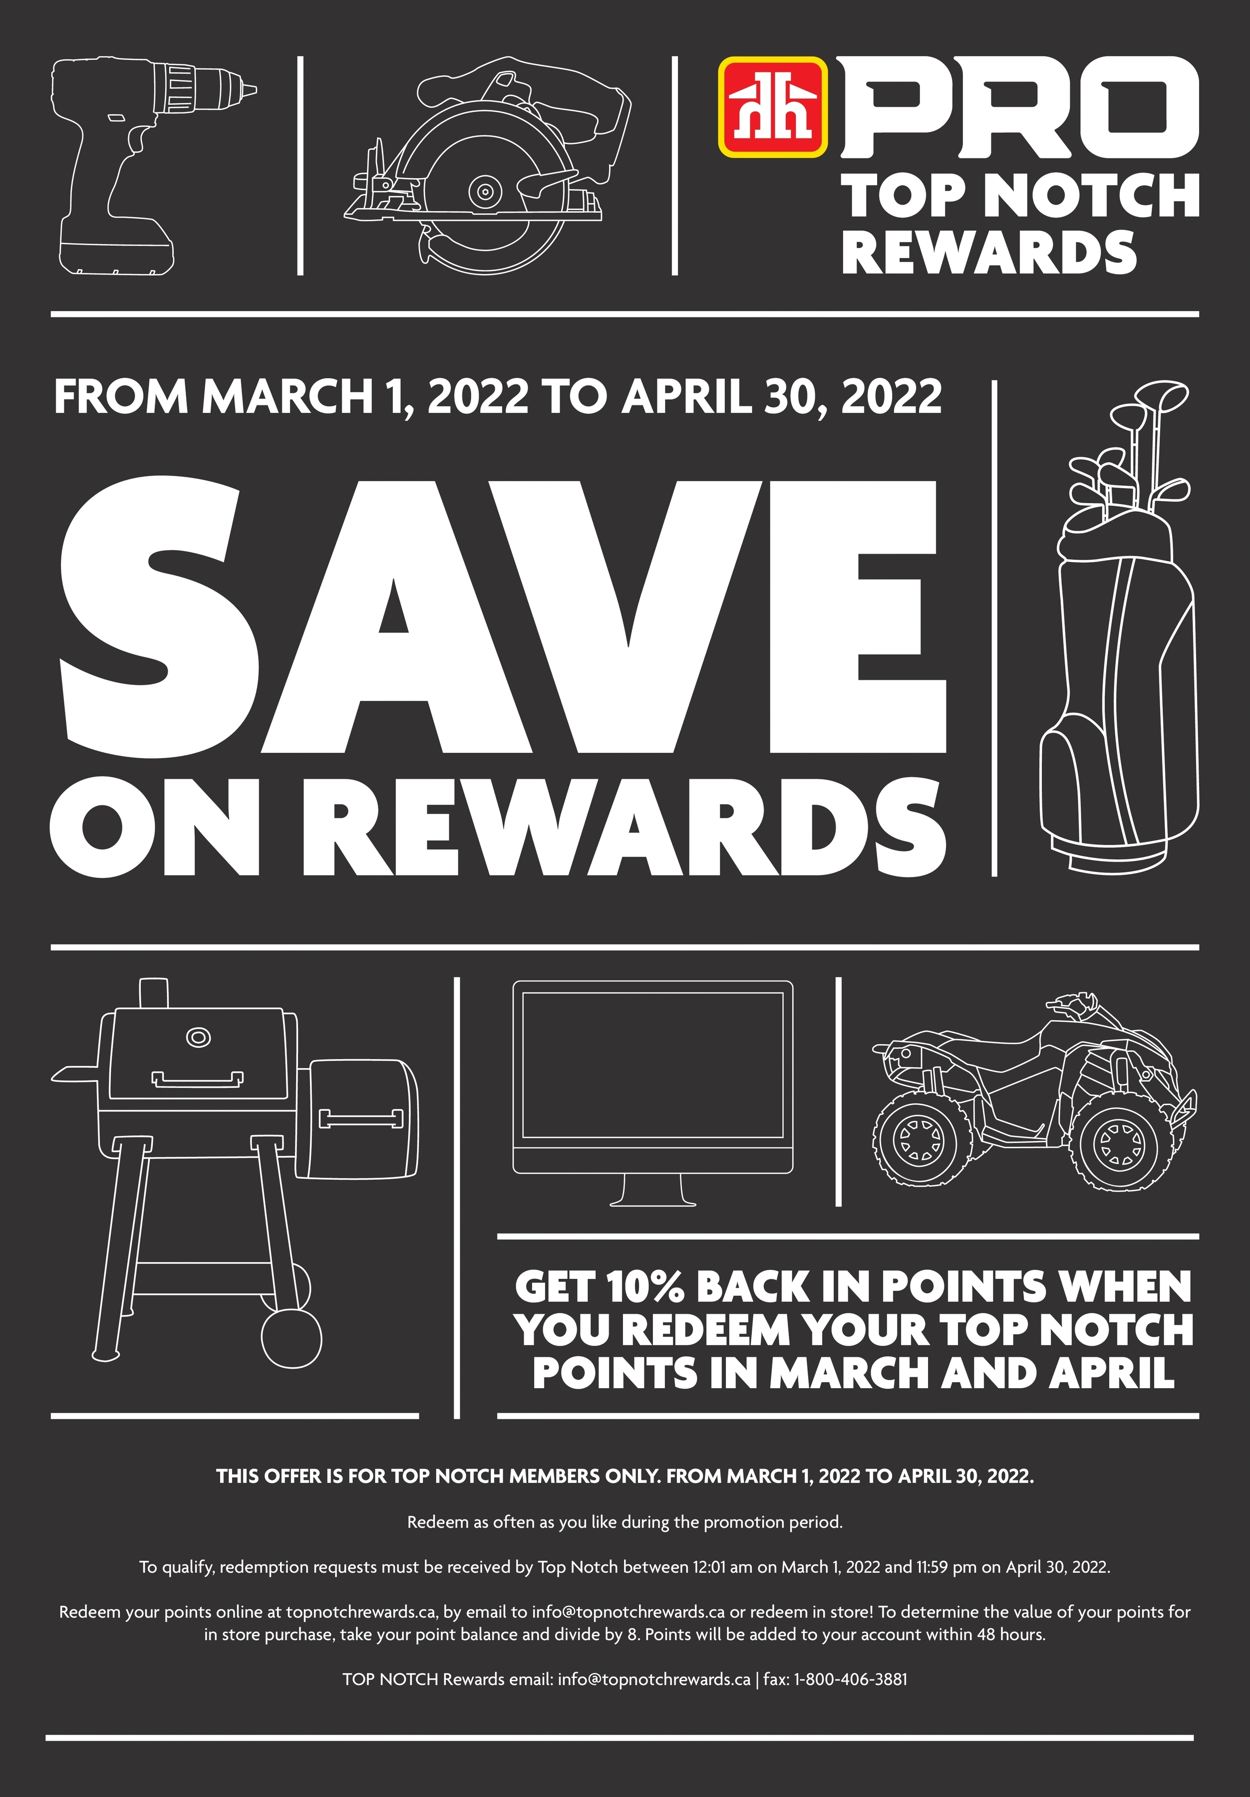 Home Hardware Flyer from 03/03/2022